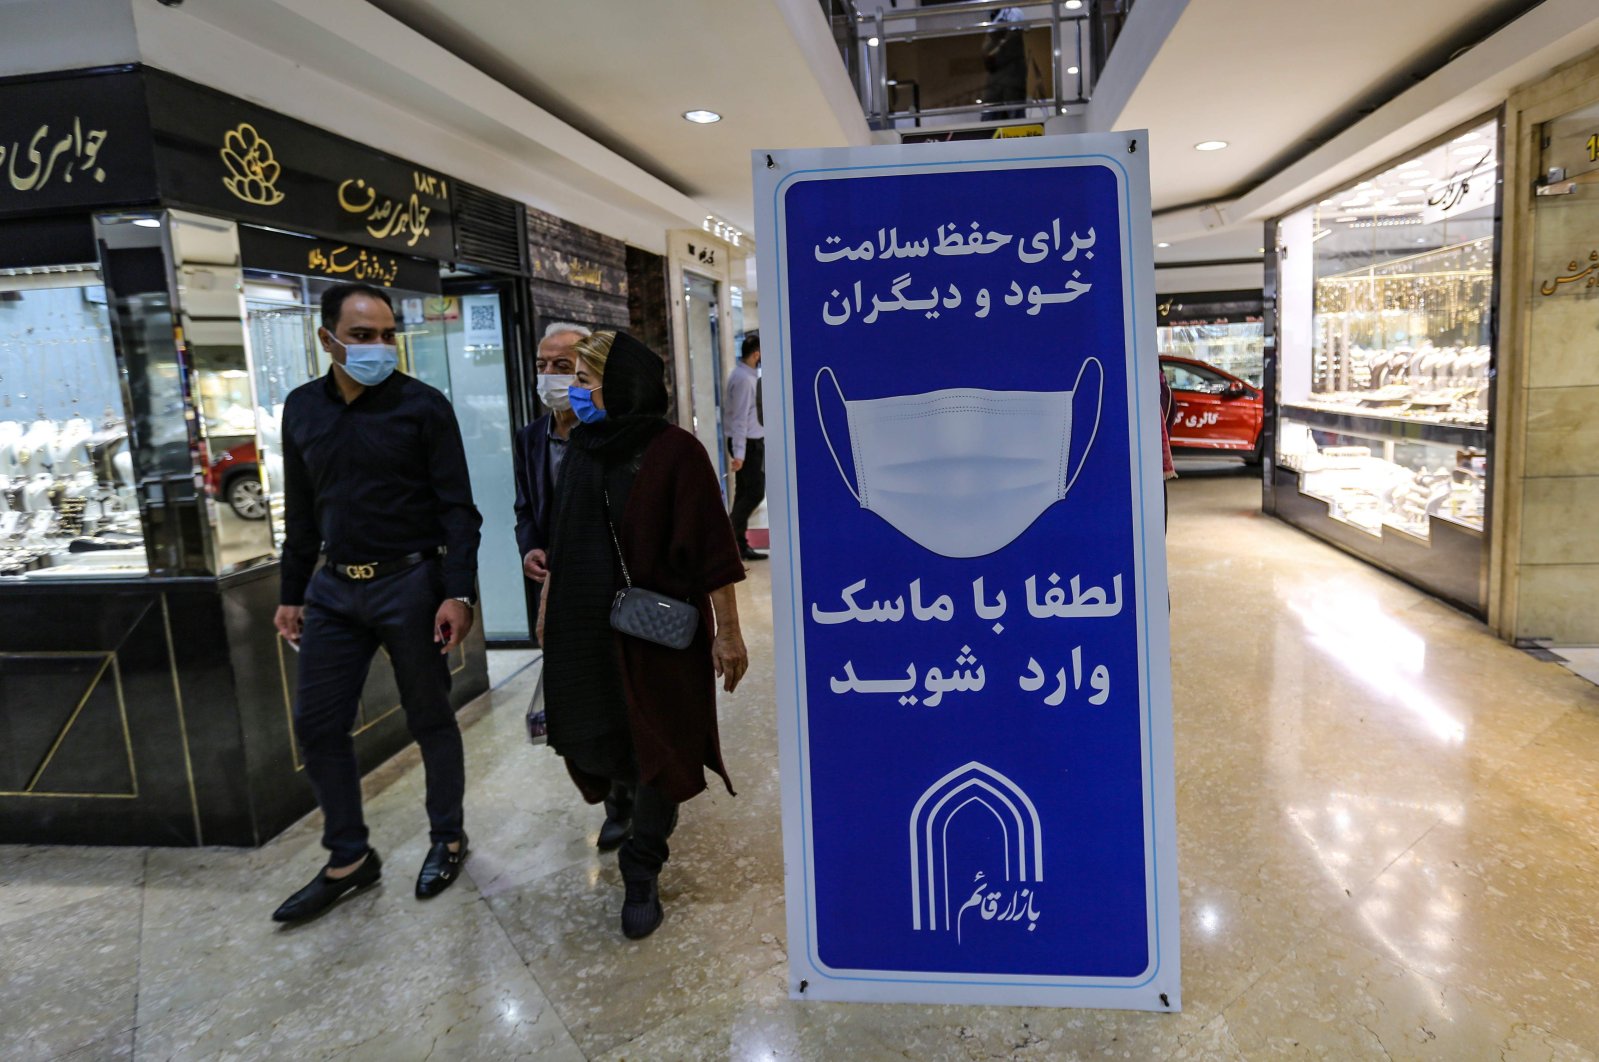 Iranians walk next to a sign advising people to wear masks on their way to shop in Tajrish square in the capital Tehran on Nov. 1, 2020, amid the COVID-19 pandemic crisis. (AFP Photo)